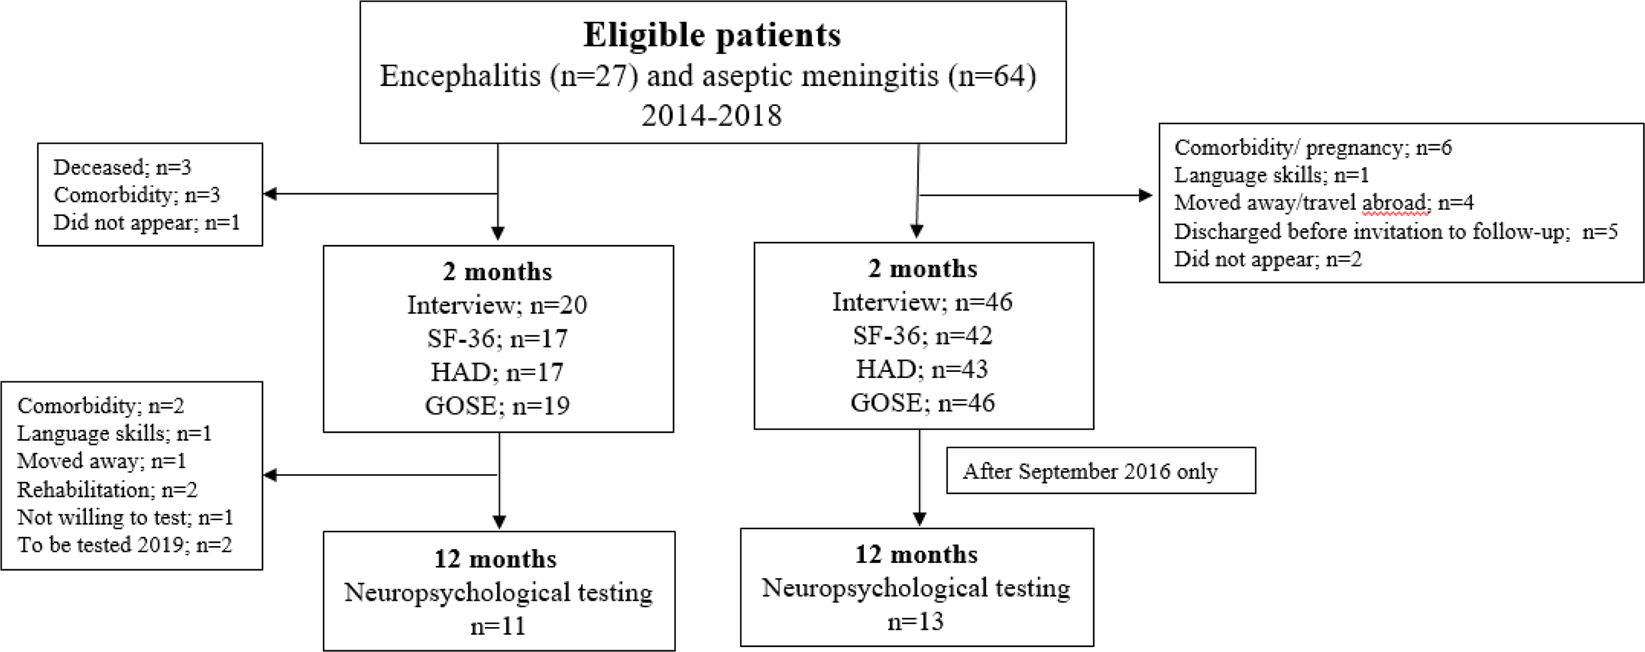 Encephalitis and aseptic meningitis: short-term and long-term outcome,  quality of life and neuropsychological functioning | Scientific Reports